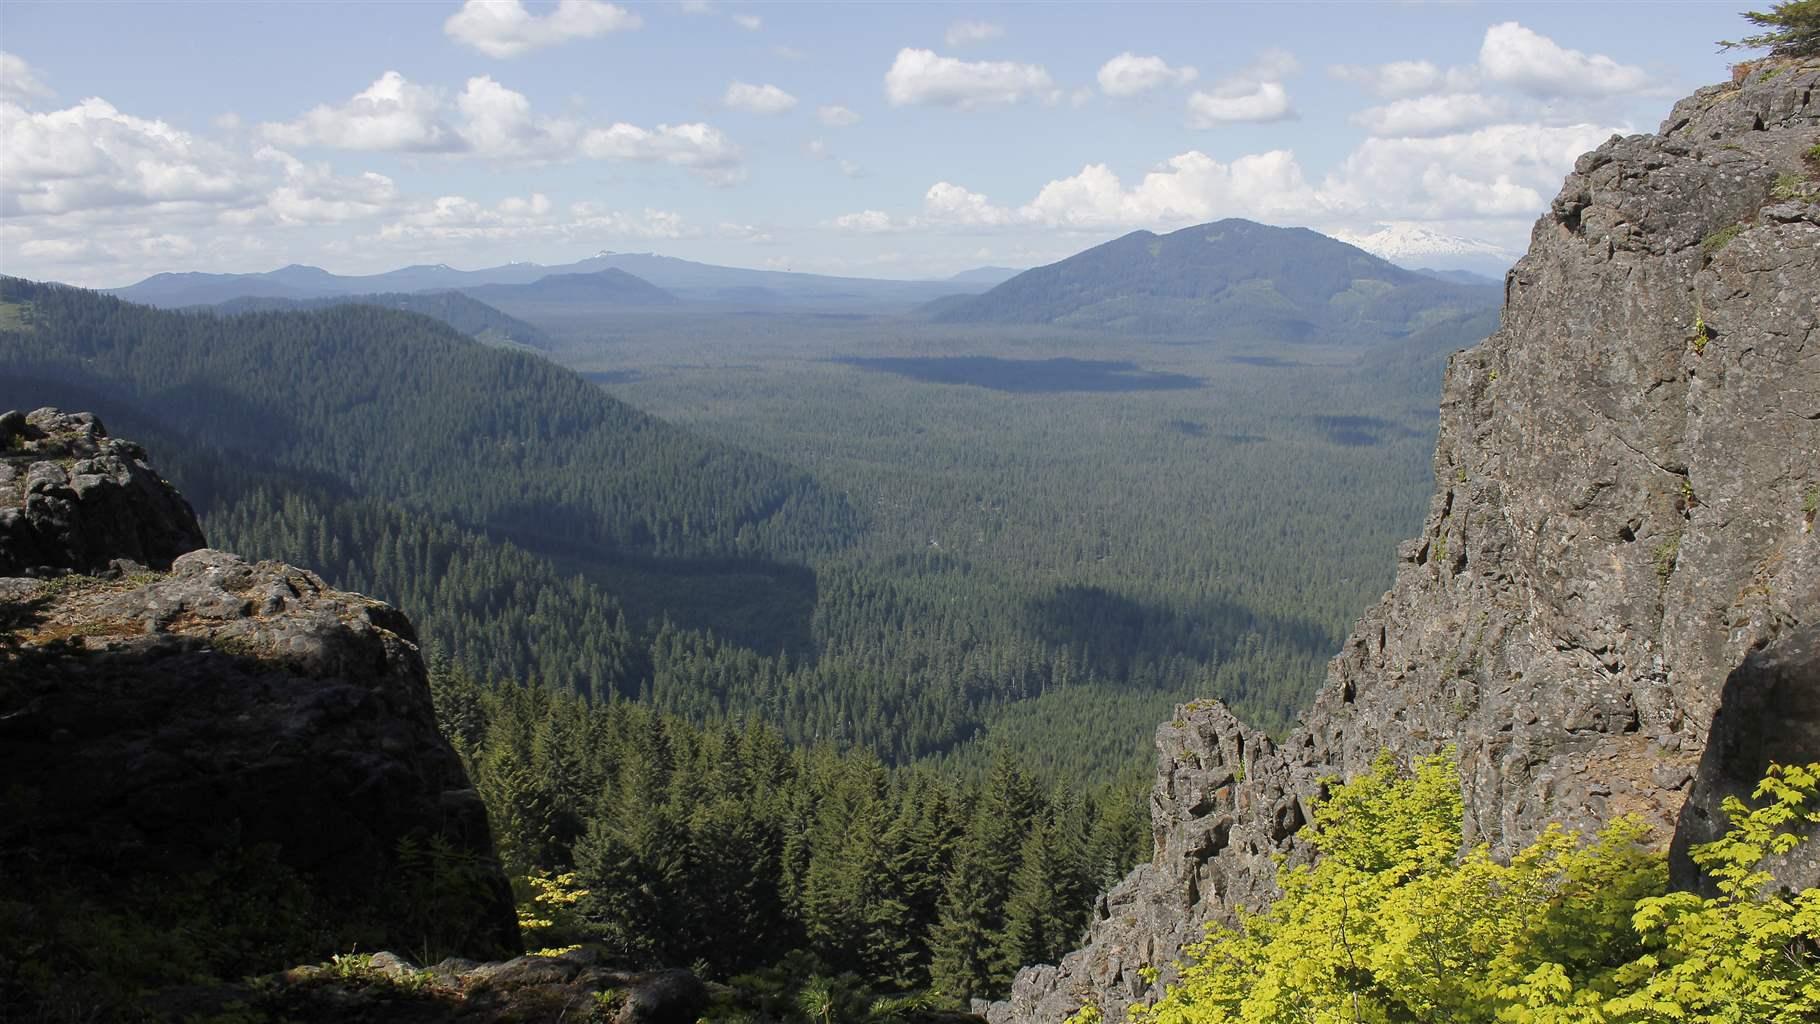 Green forests stretch to the horizon from this overlook on Big Huckleberry Mountain in the Gifford Pinchot National Forest in Washington